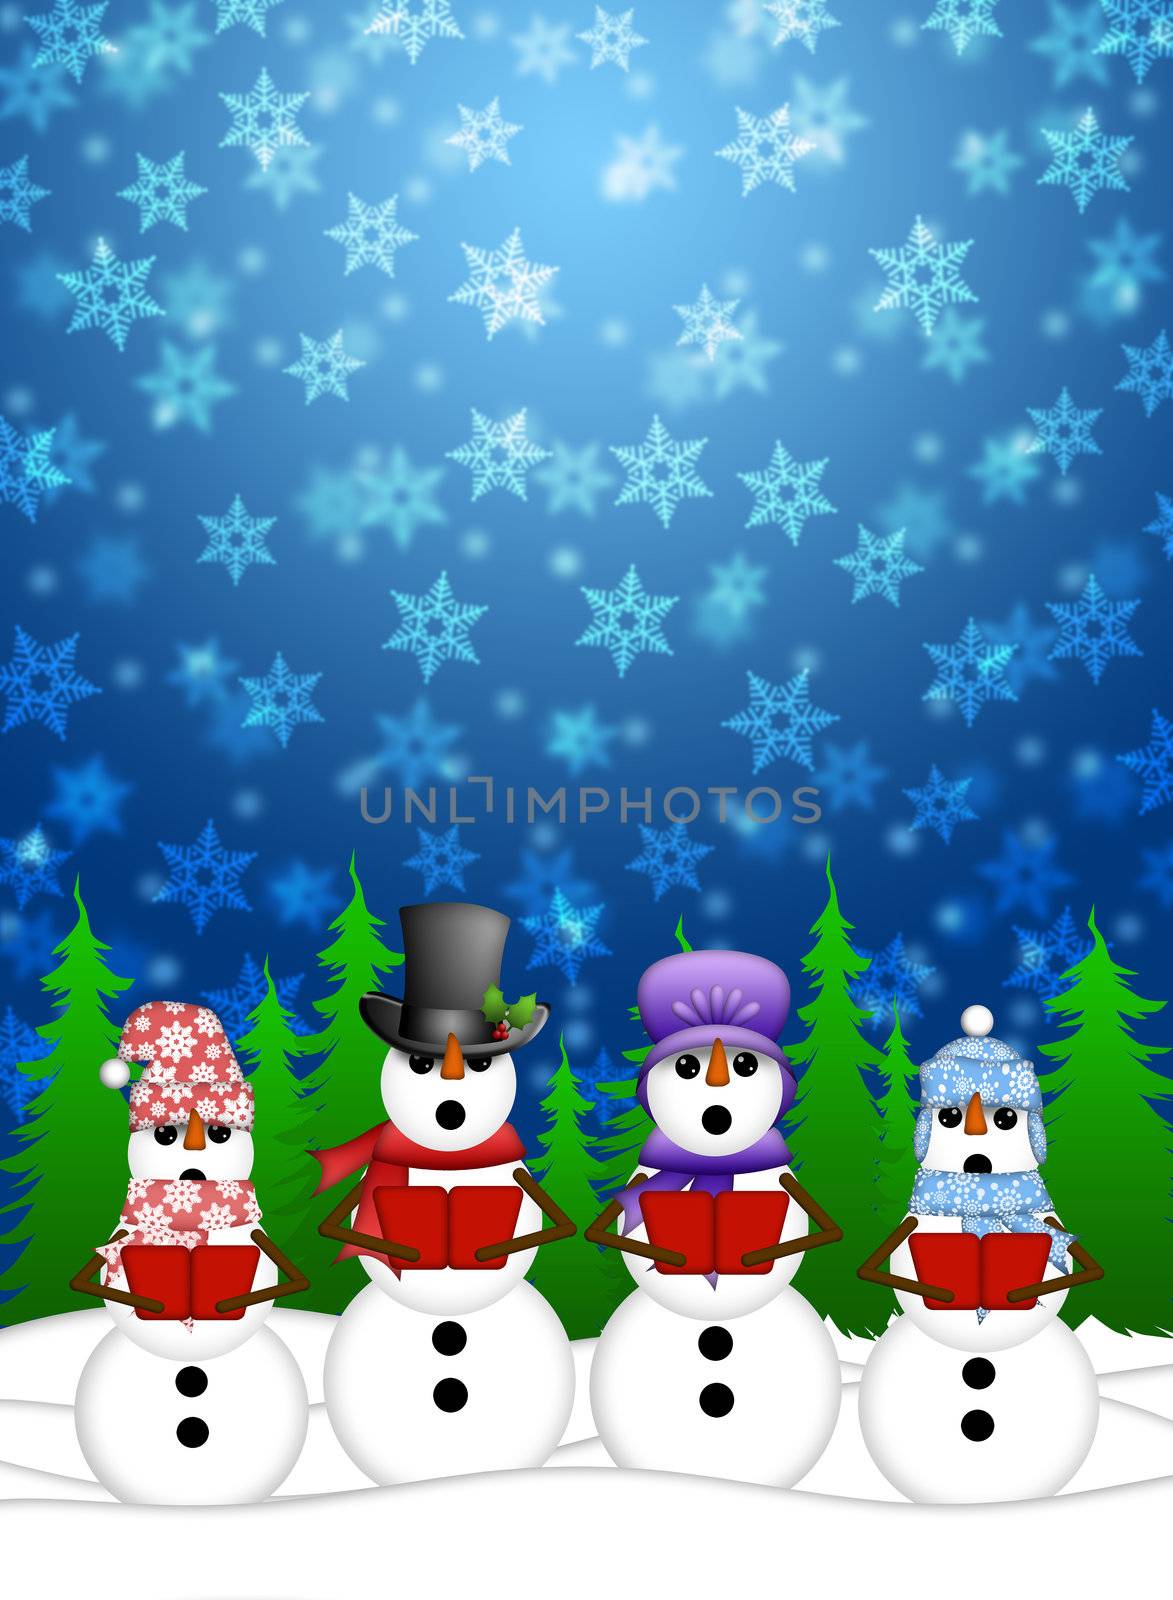 Snowman Carolers Singing with Winter Snowing Scene Illustration by Davidgn